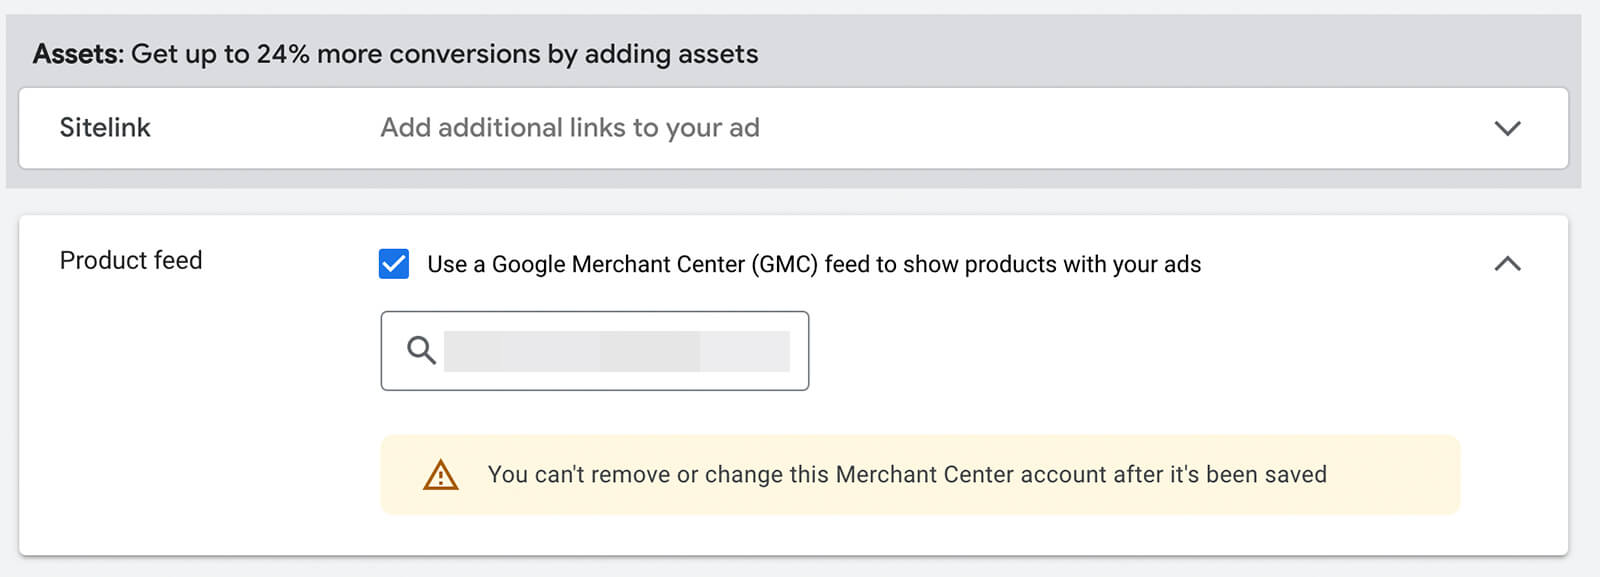 how-to-configure-the-product-feed-using-youtube-ad-campaign-for-shoppable-assets-section-product-feed-check-use-a-google-merchant-center-show-products-with-your-ads-box-example-14